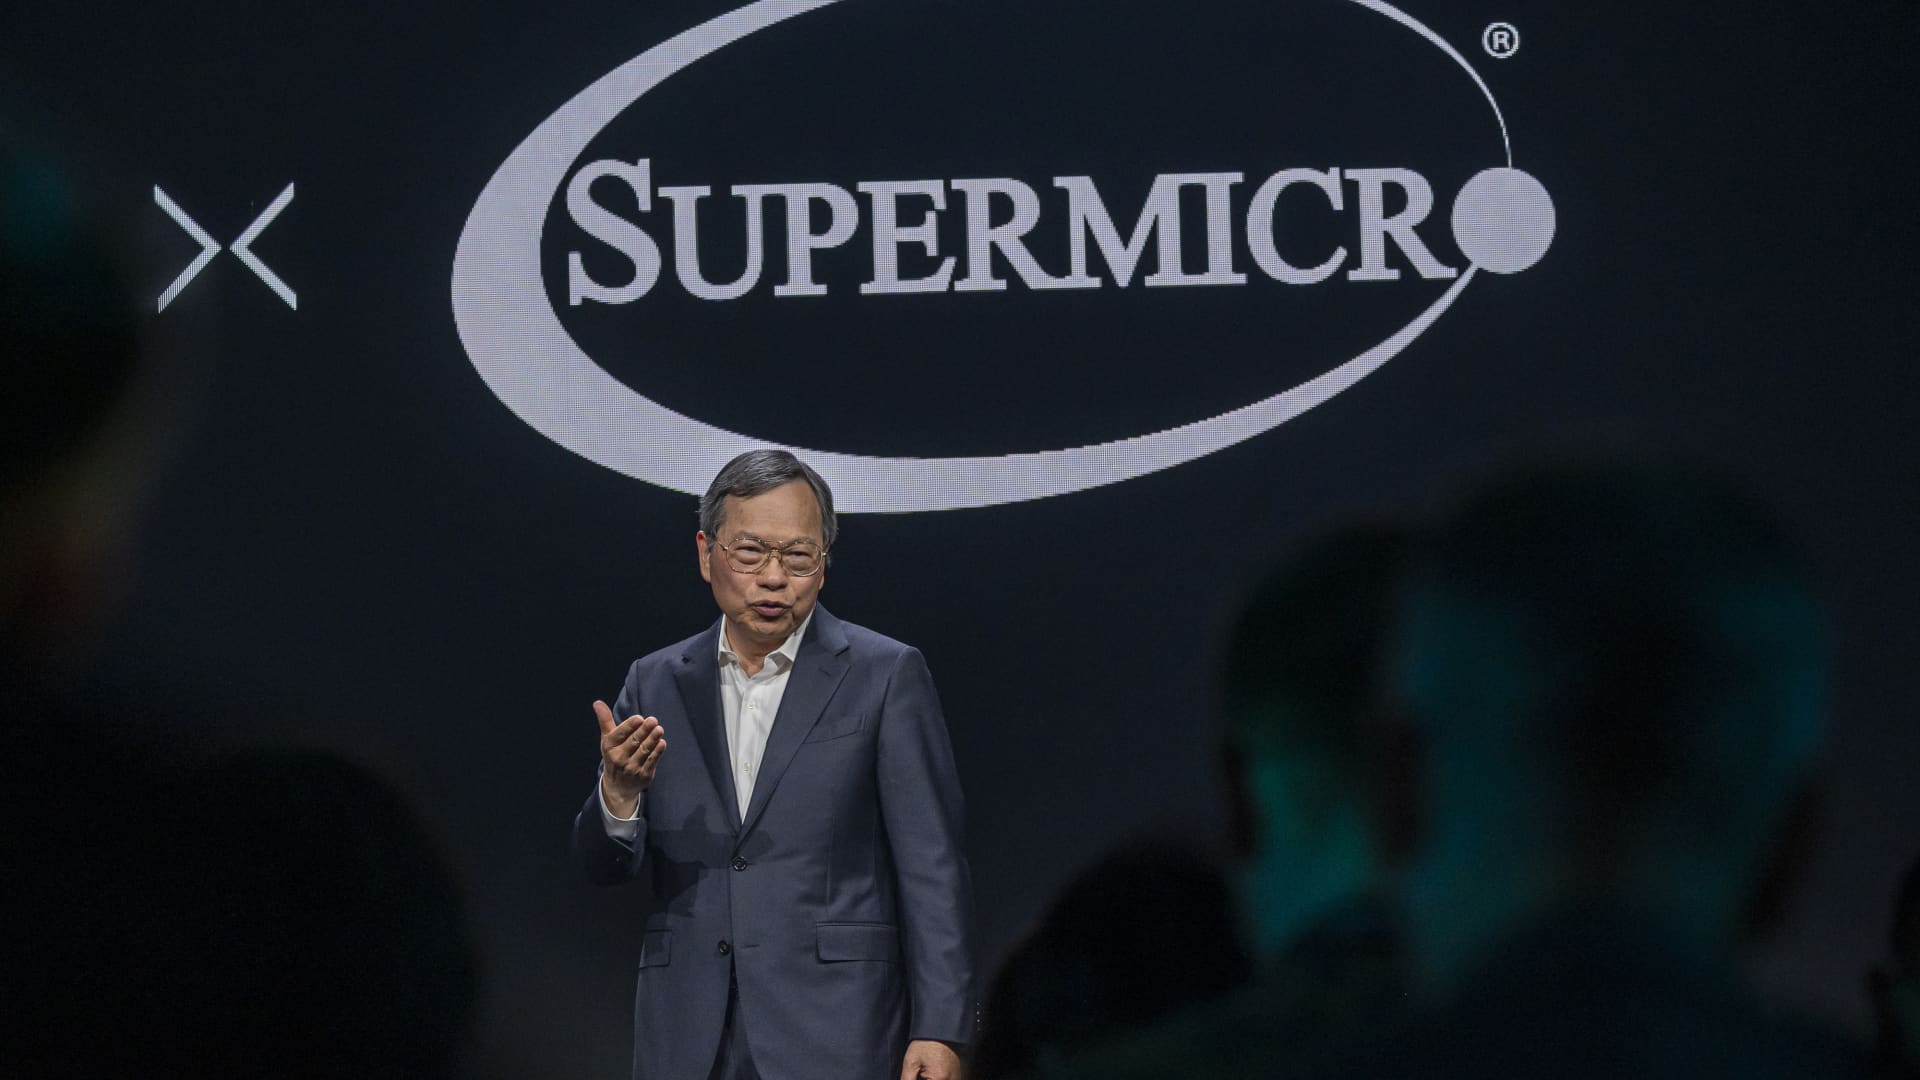 Super Micro to join S&P 500 after stock price soars more than twentyfold in two years